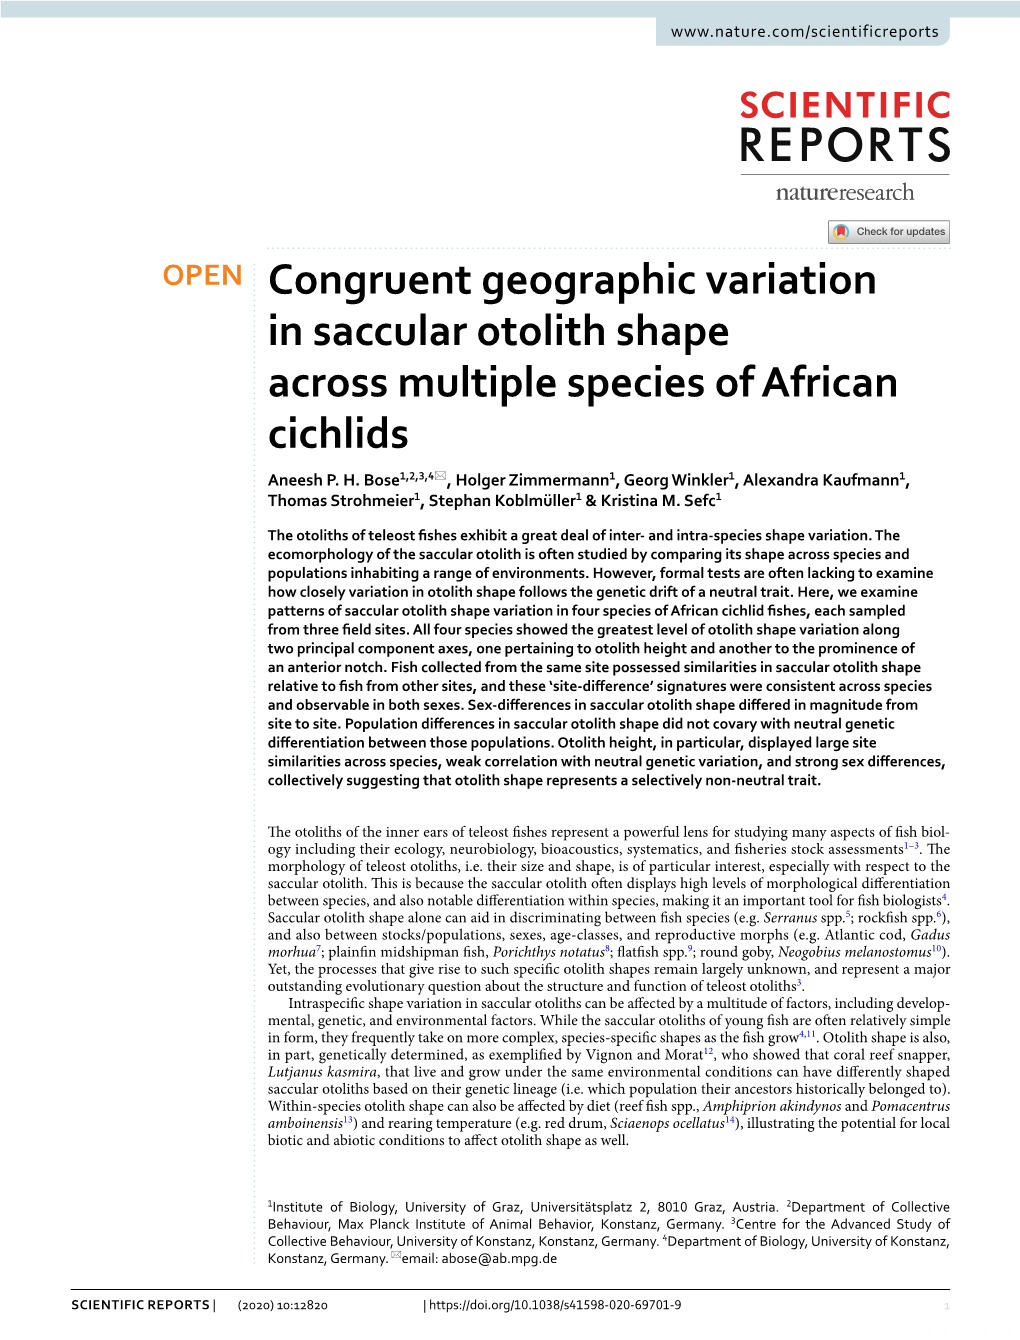 Congruent Geographic Variation in Saccular Otolith Shape Across Multiple Species of African Cichlids Aneesh P